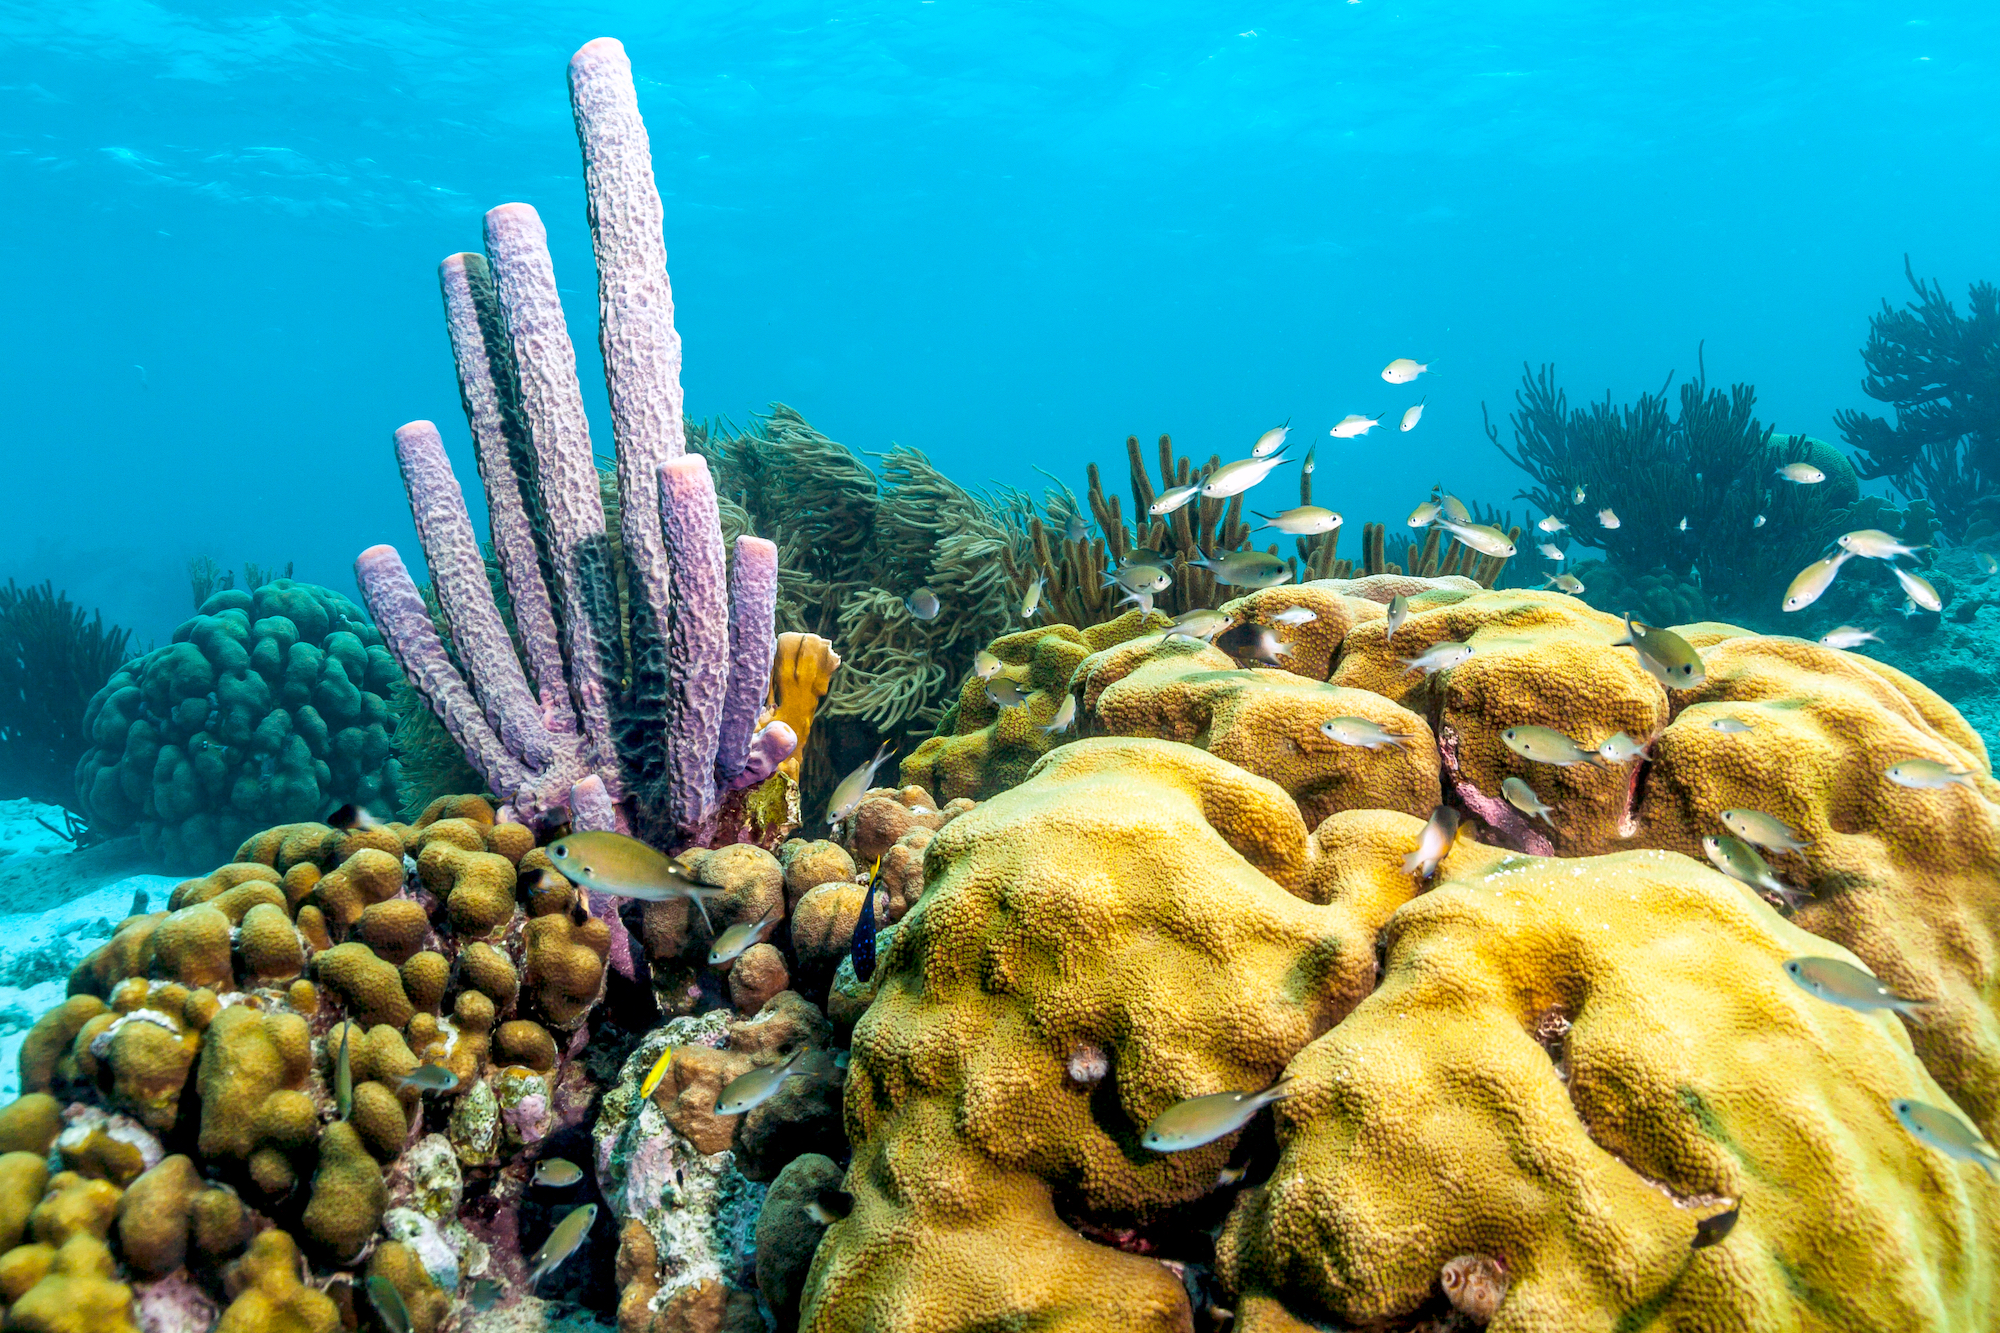 A colorful coral reef seen at Bonaire dive sites such as 1,000 Steps, one of the best dive sites in the world for beginners